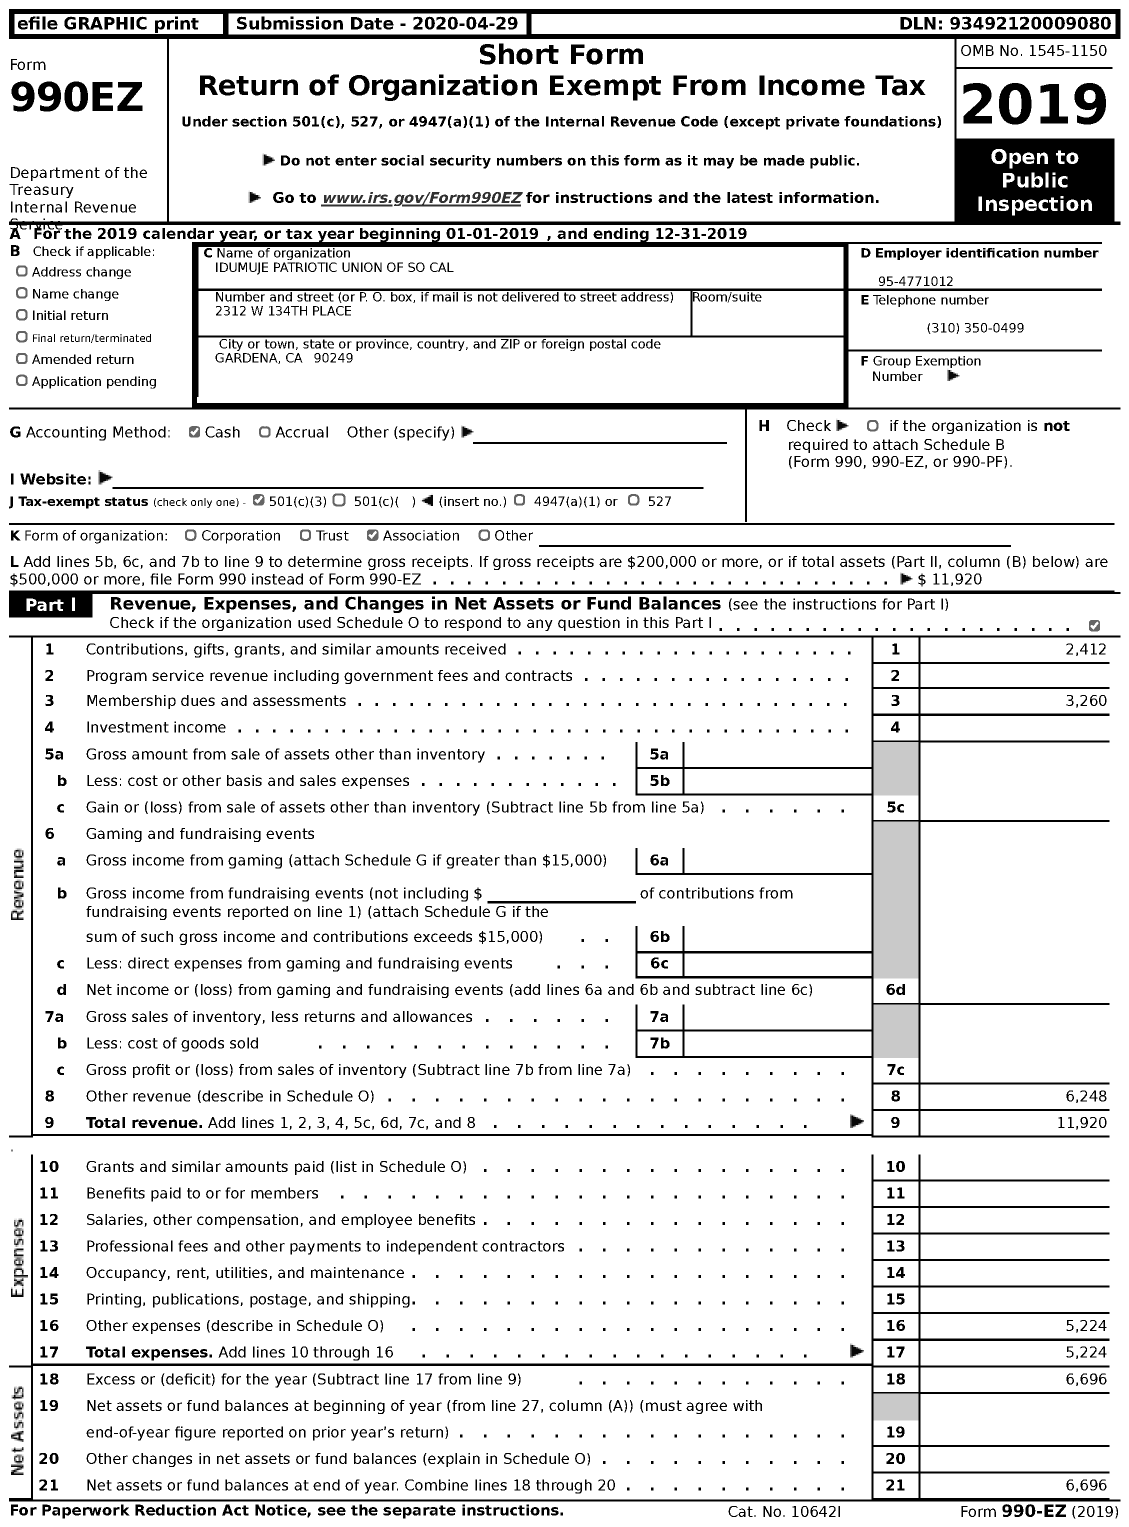 Image of first page of 2019 Form 990EZ for Idumuje Patriotic Union of So Cal